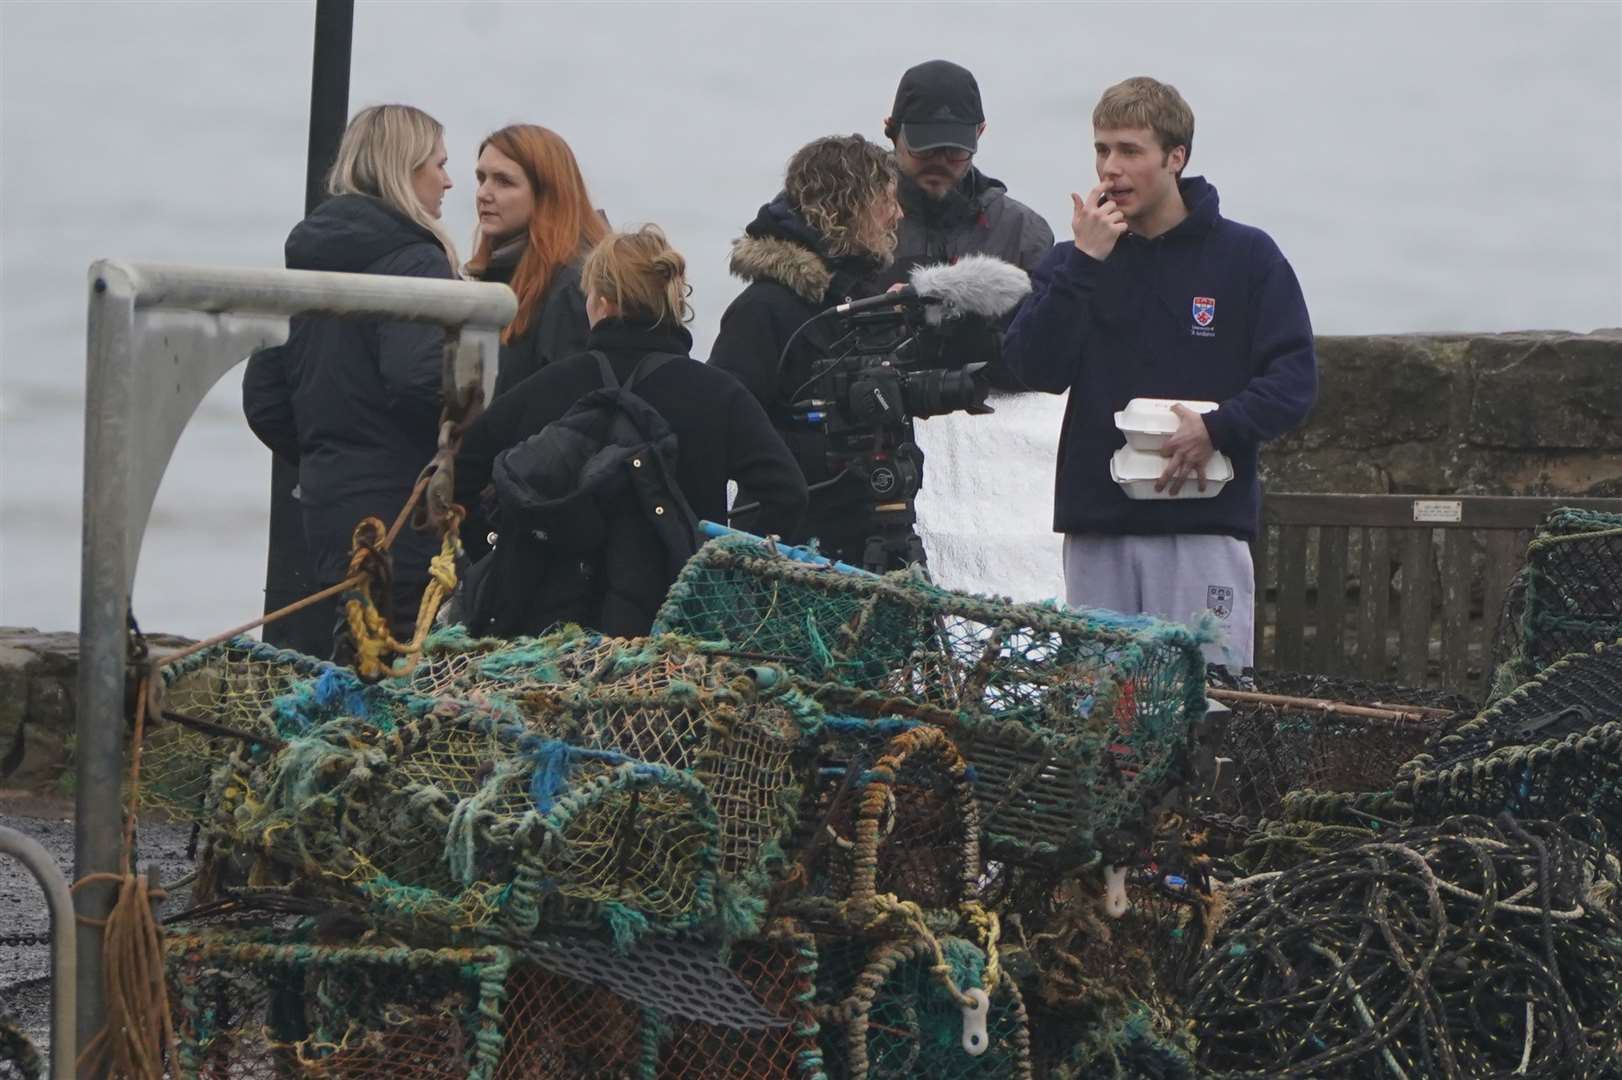 McVey joined the crew for lunch during a pause in filming (Andrew Milligan/PA)